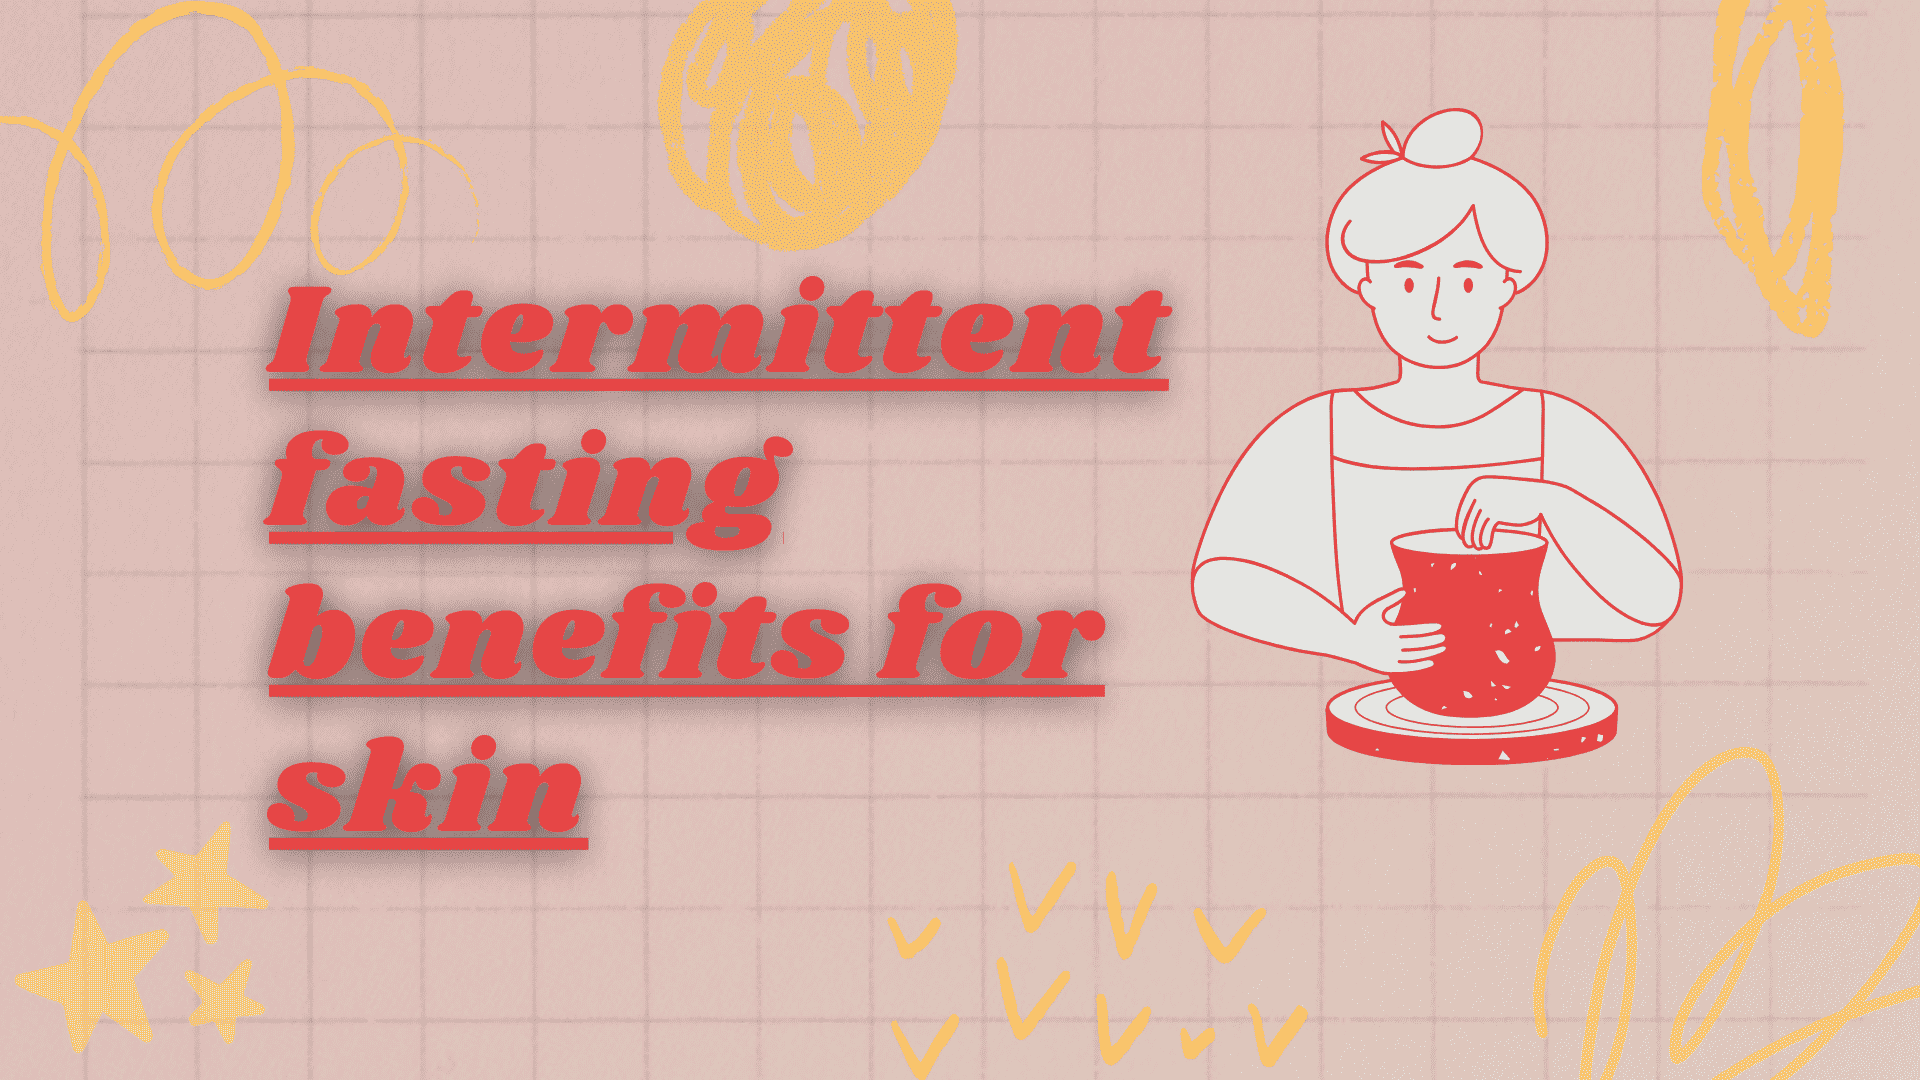 Intermittent fasting benefits for skin